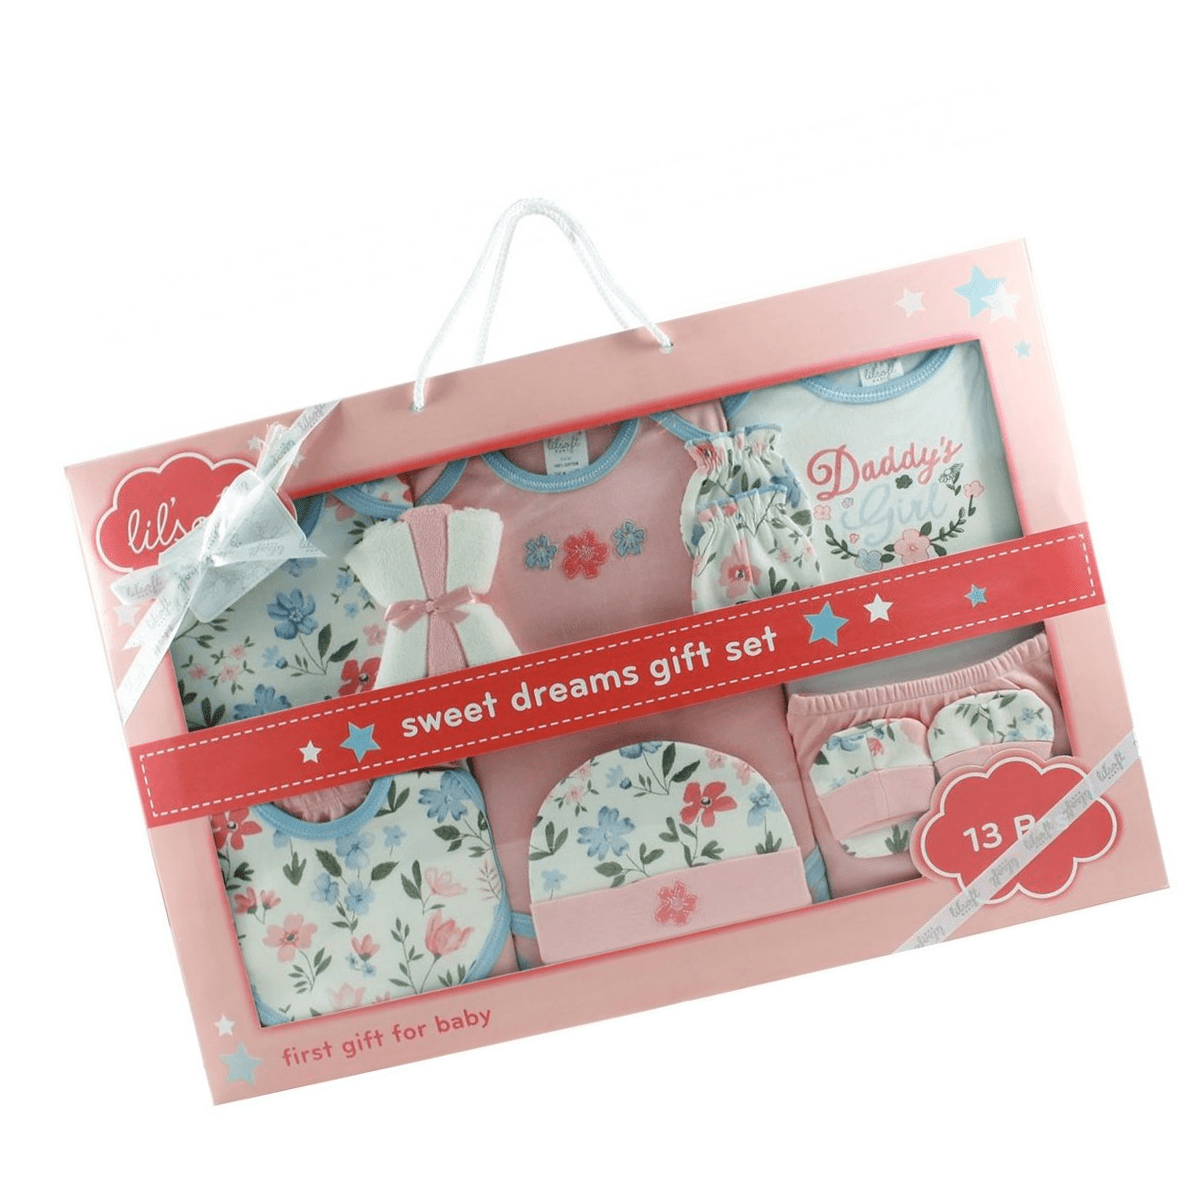 Lilsoft New Born Baby's Clothing Gift Set Box of 12 PCS For Girls #2478